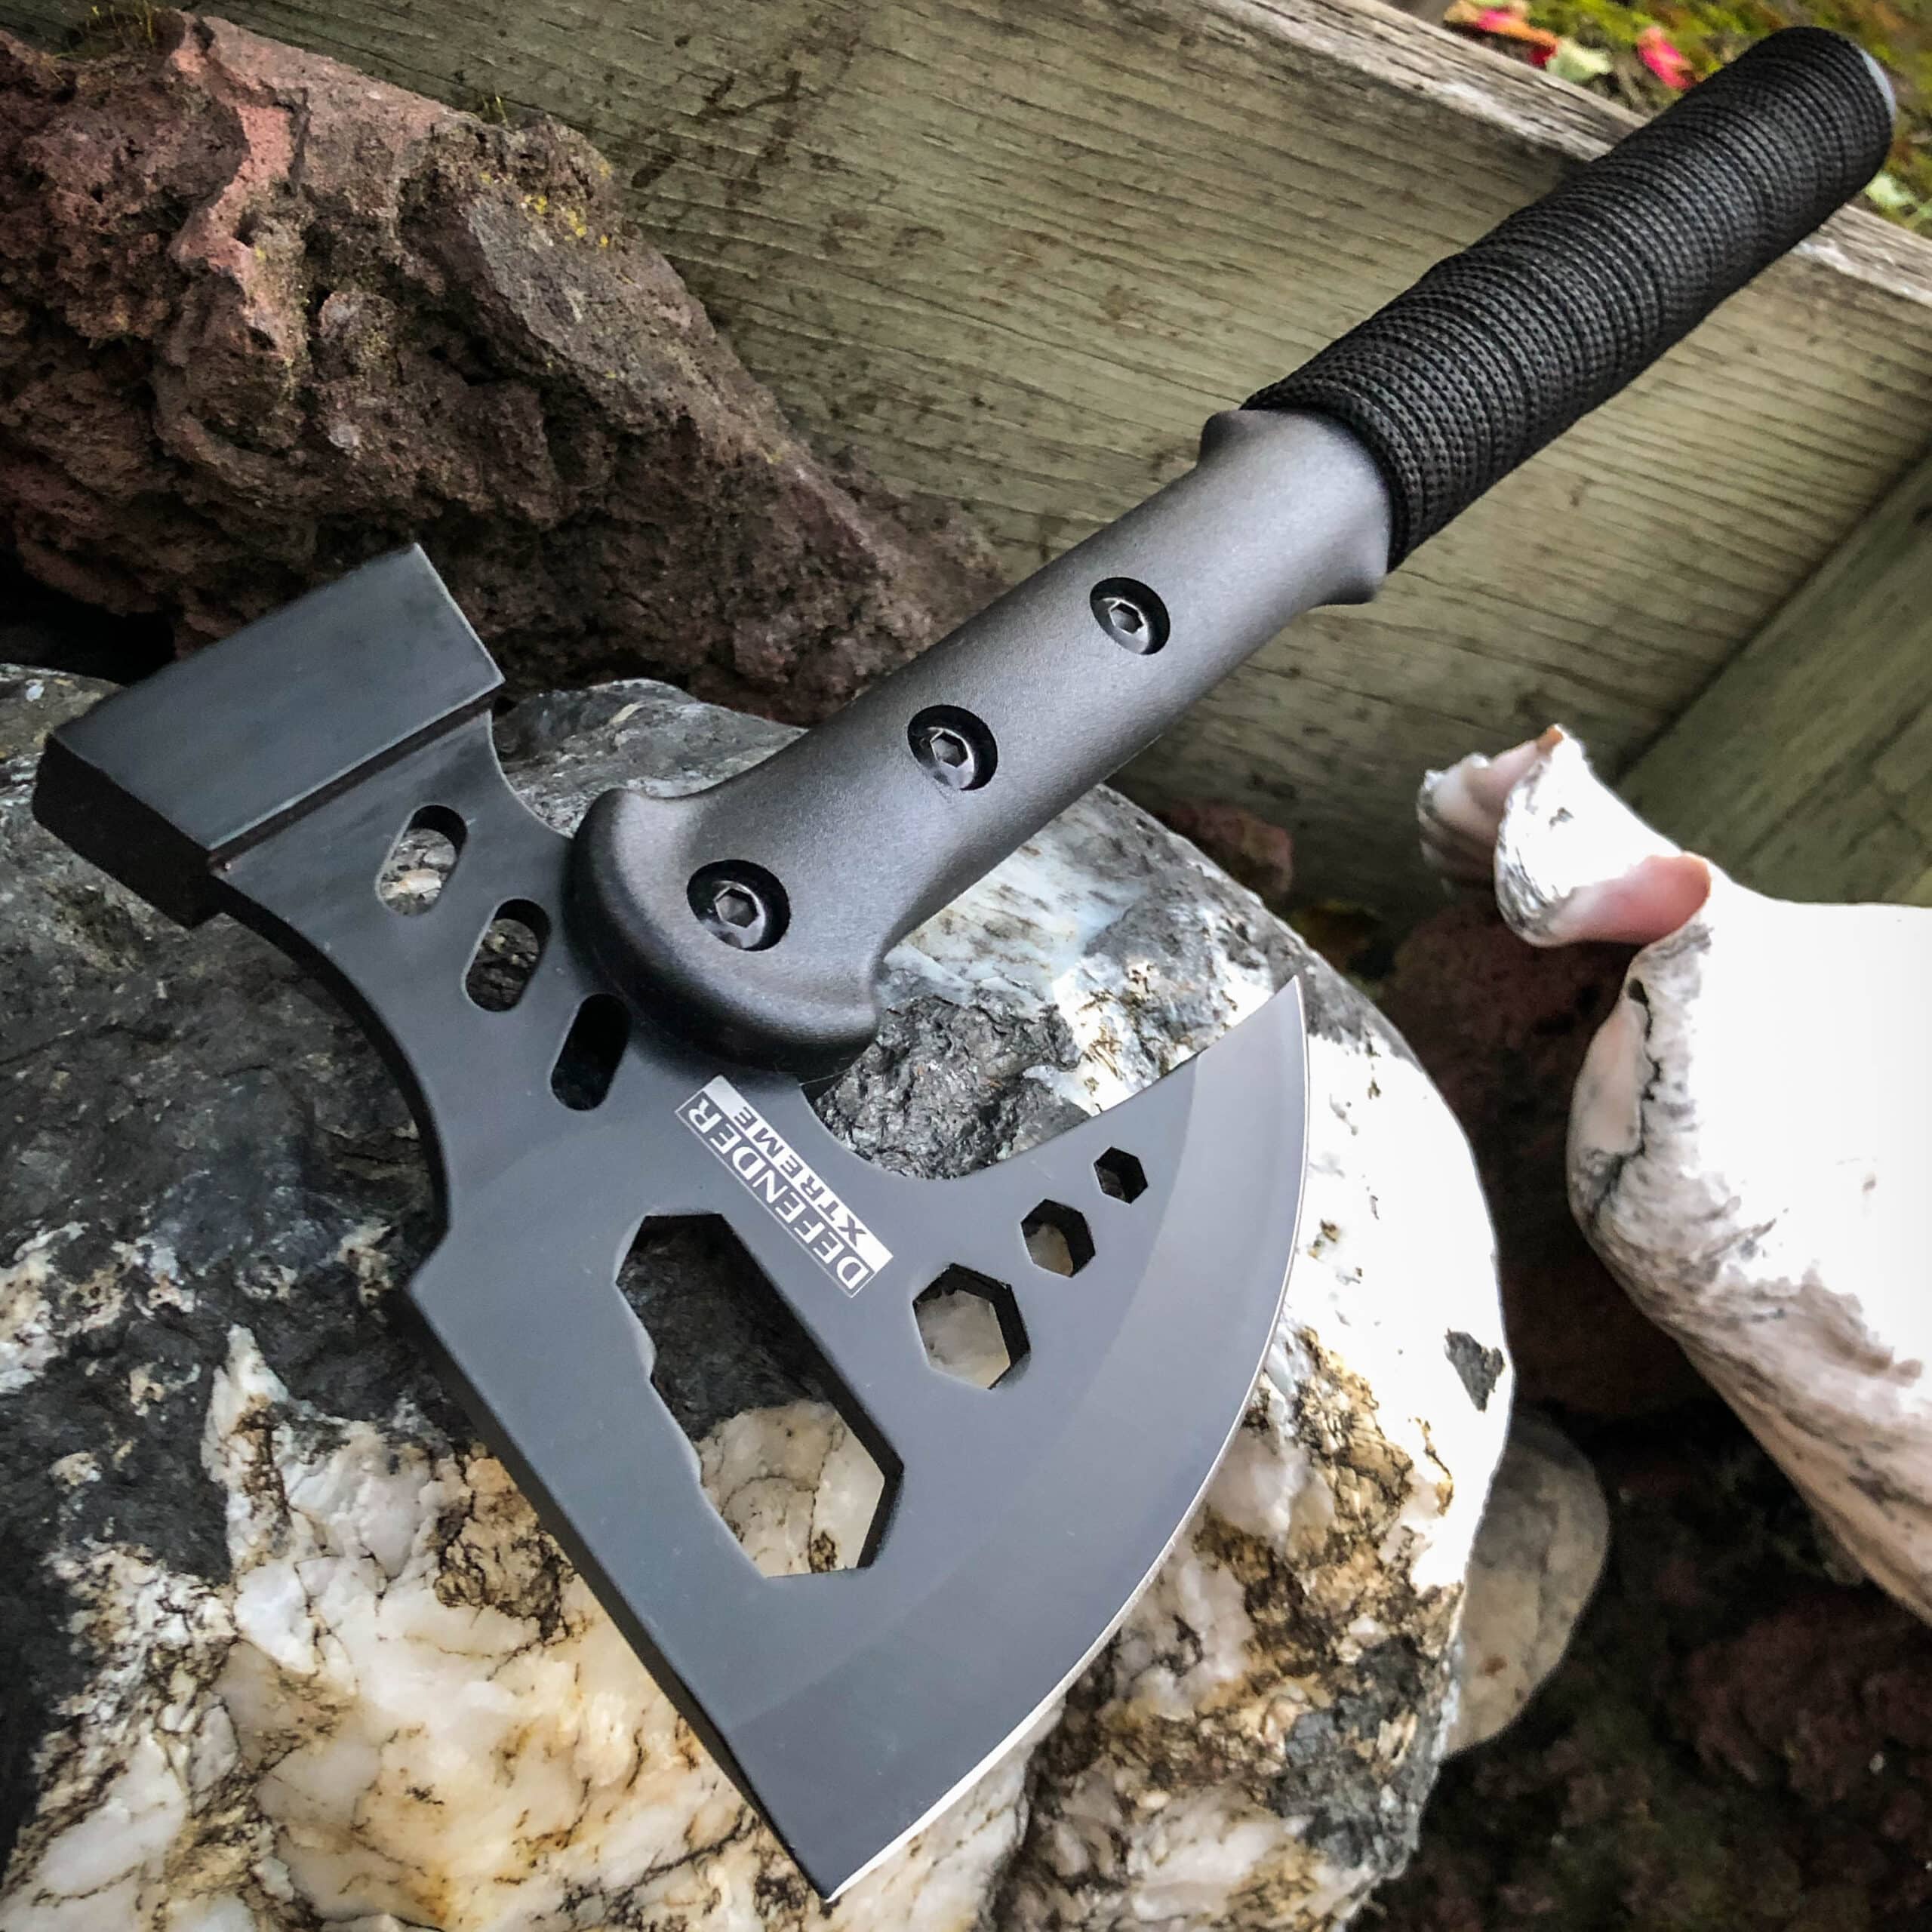 17" Tactical TOMAHAWK THROWING AXE BATTLE Hatchet Hunting Knife SURVIVAL CAMPING